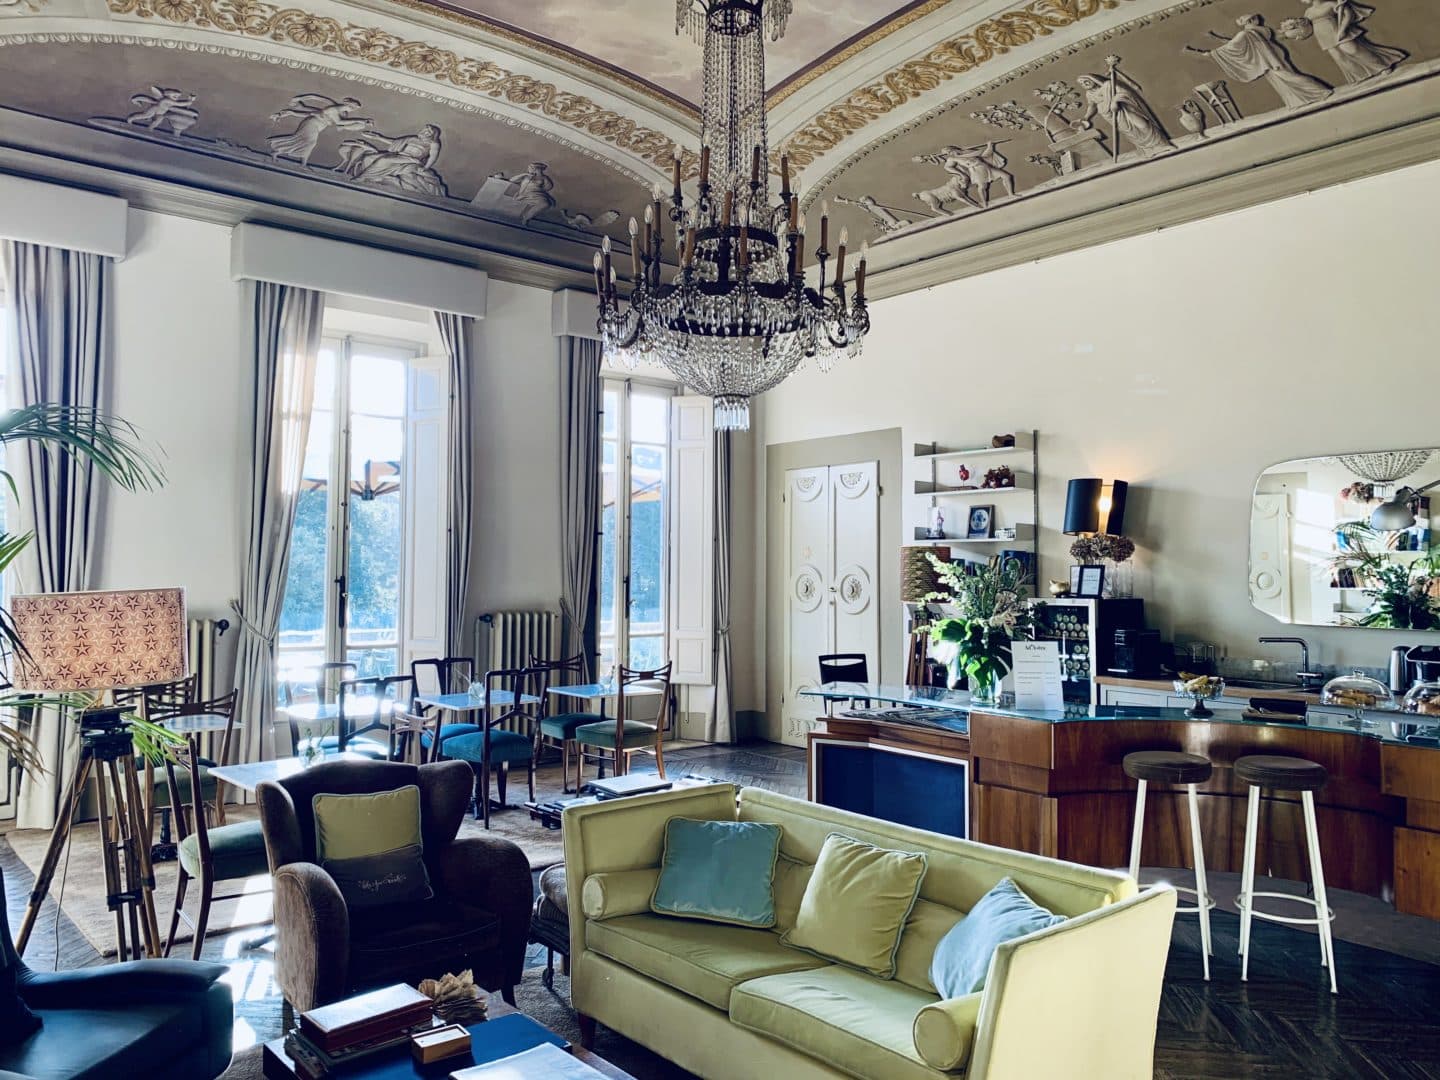 AdAstra Hotel Particulier Florence: A Review